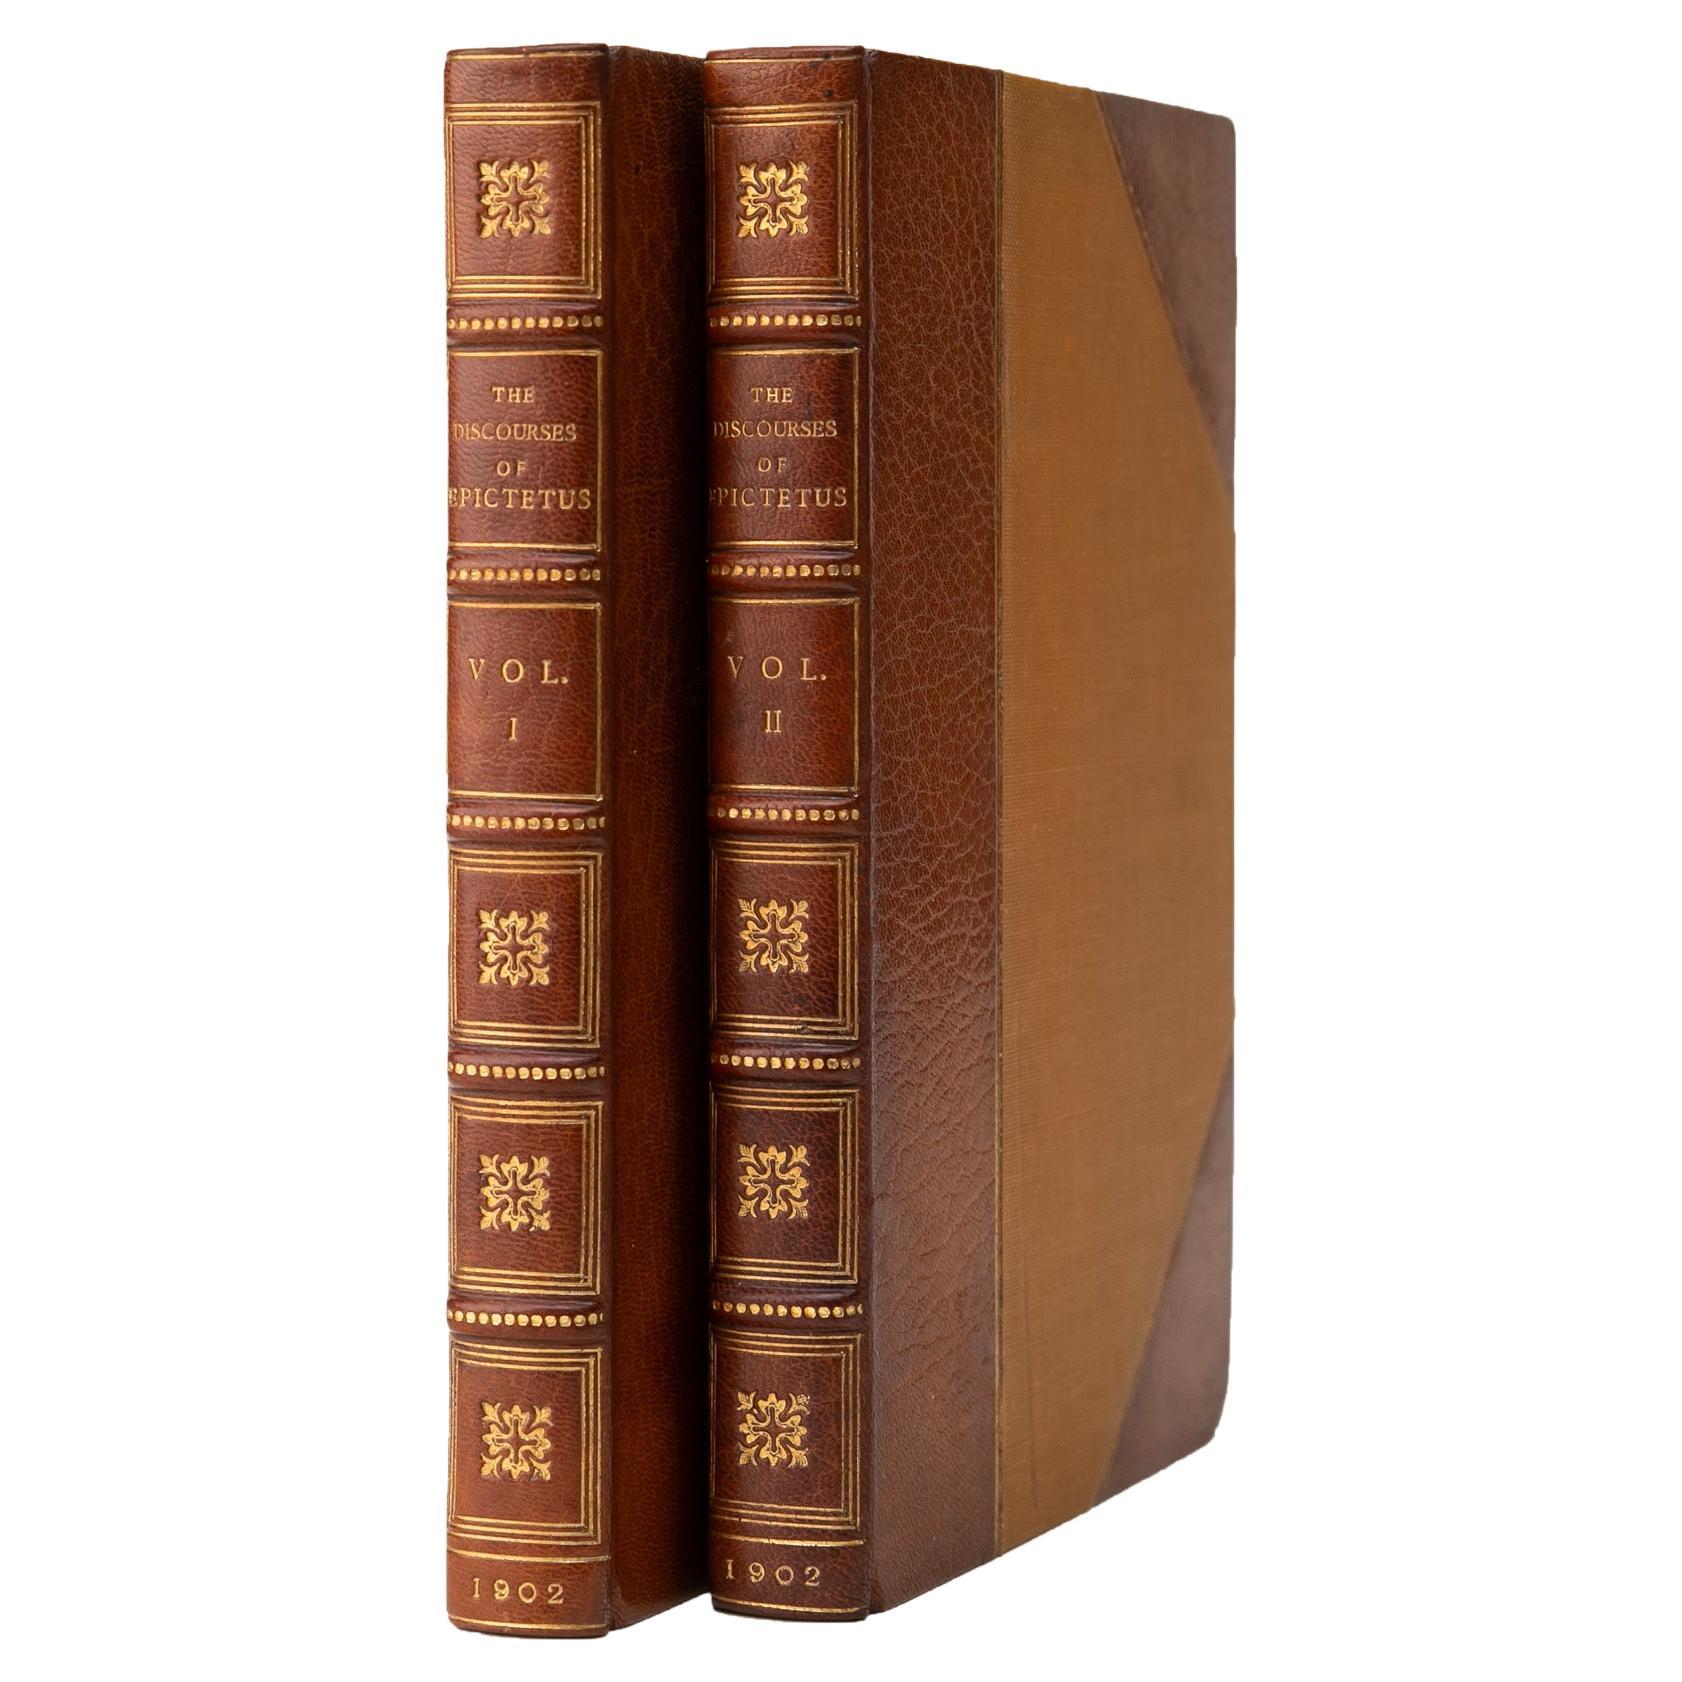 2 Volumes. George Long, The Discourses of Epictetus. For Sale